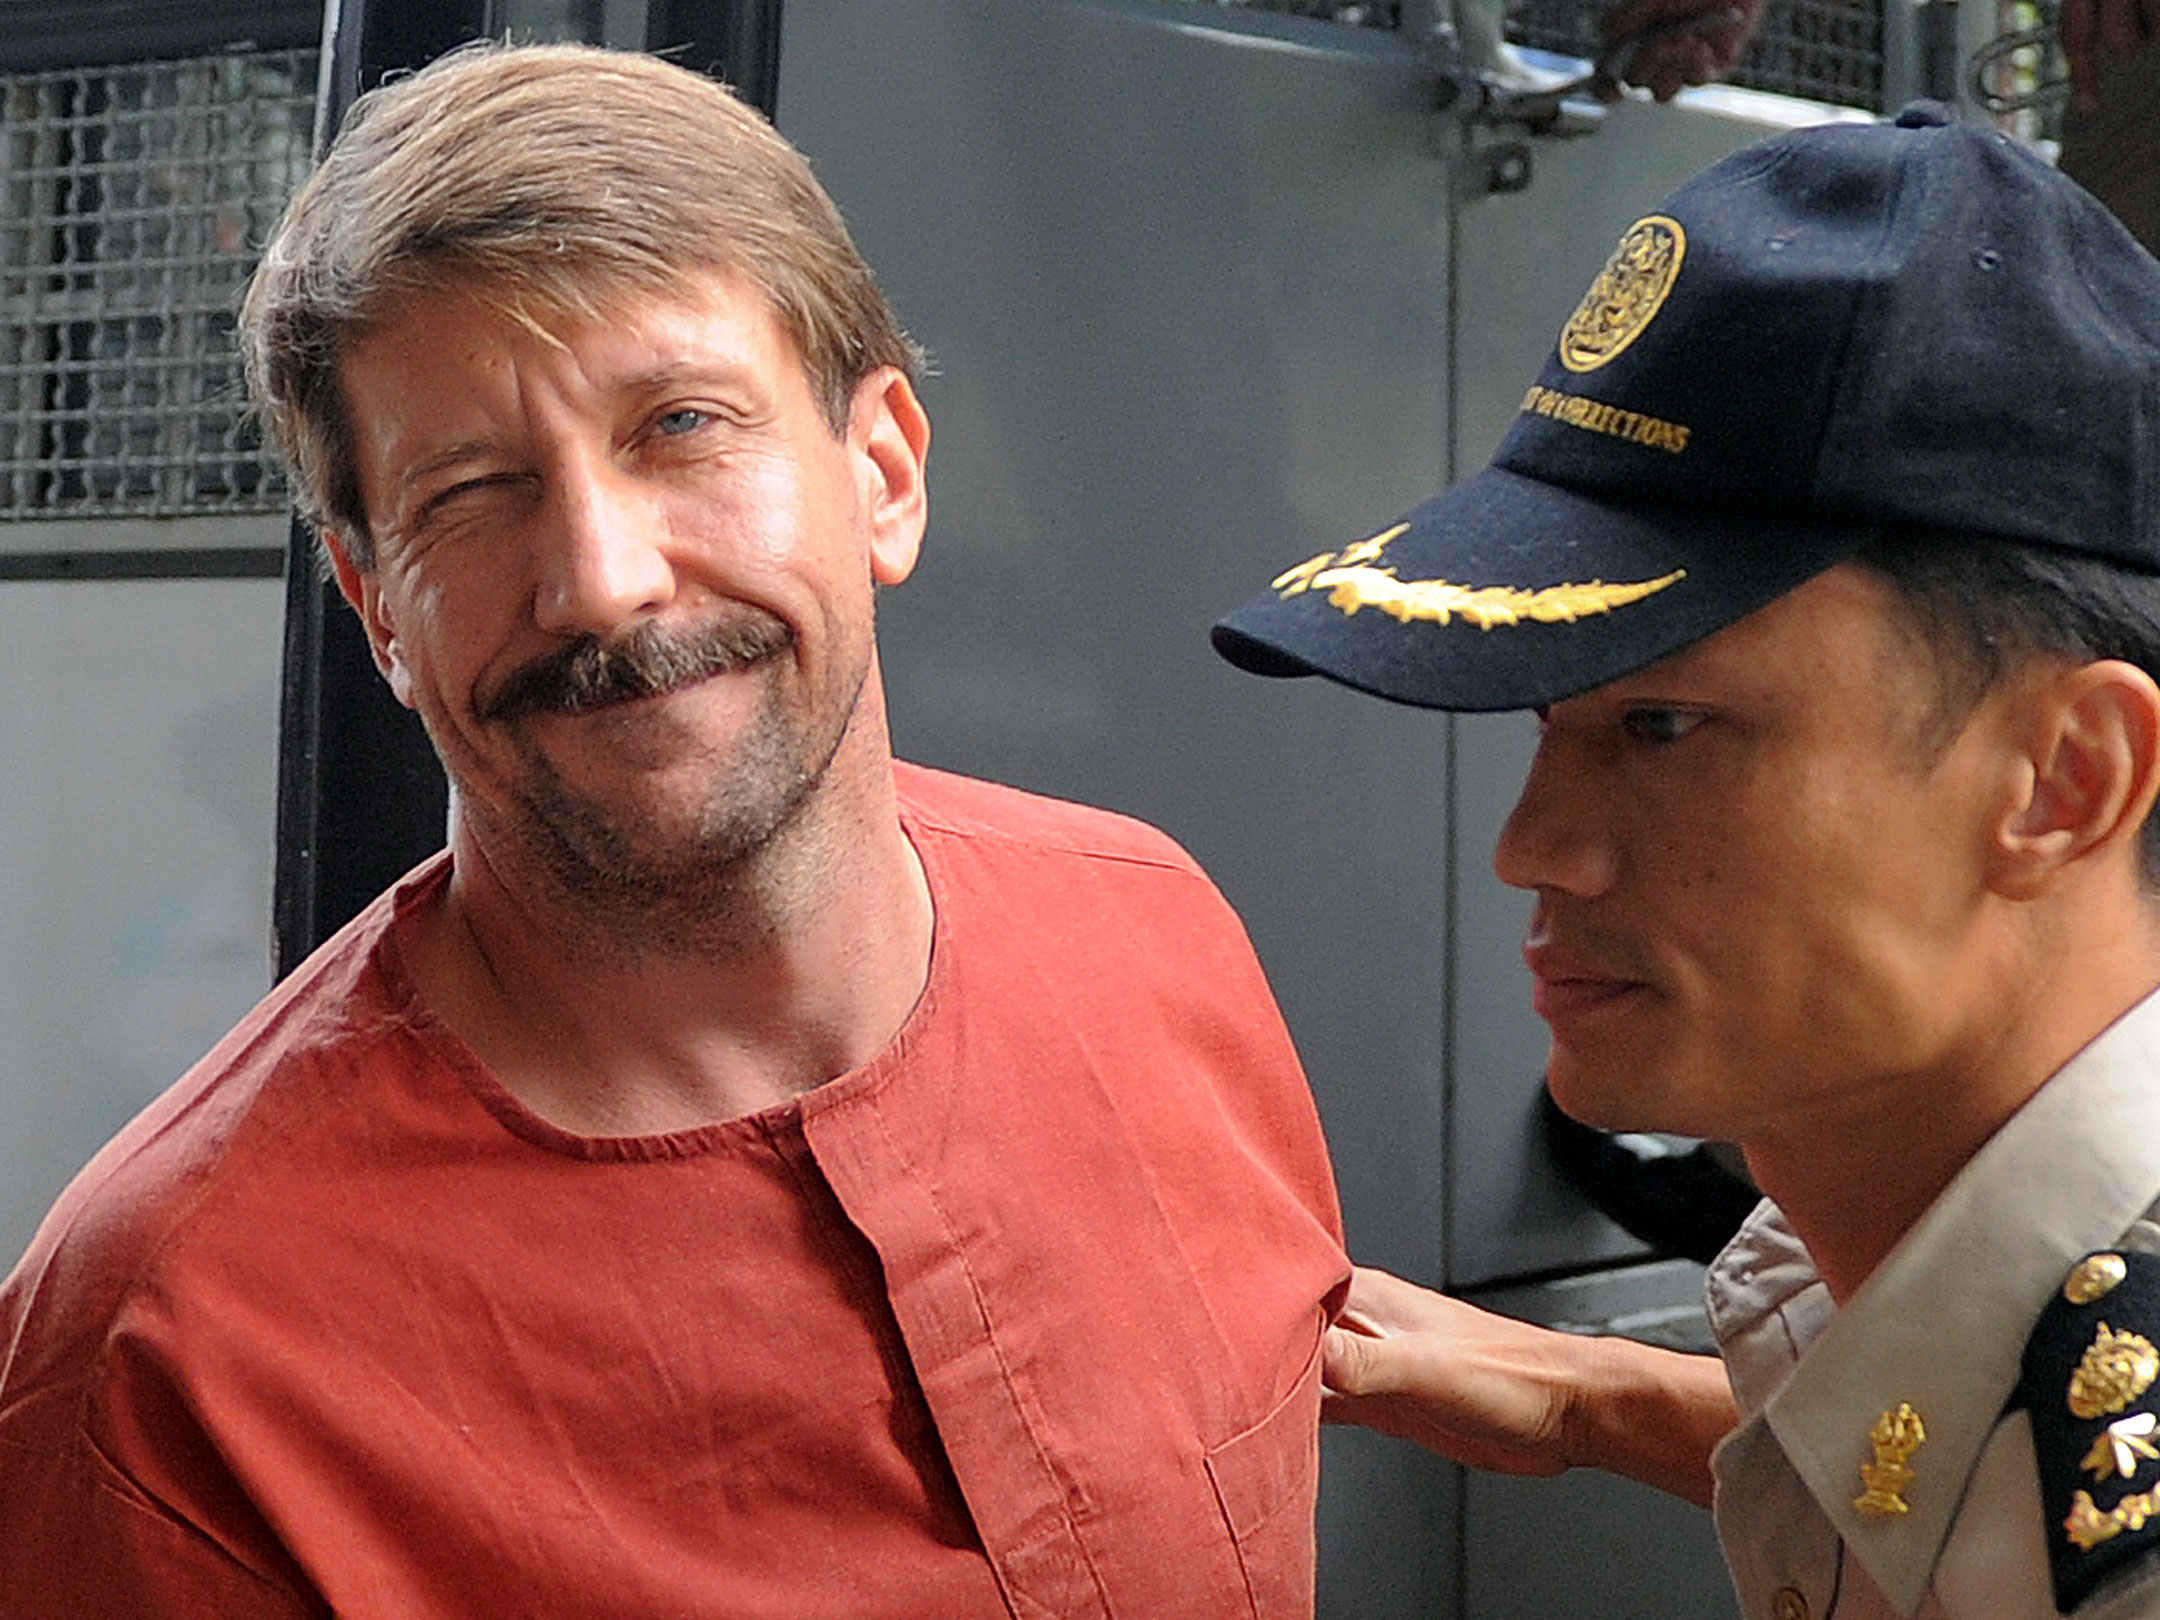 God Bless Viktor Bout and the Russian Federation!